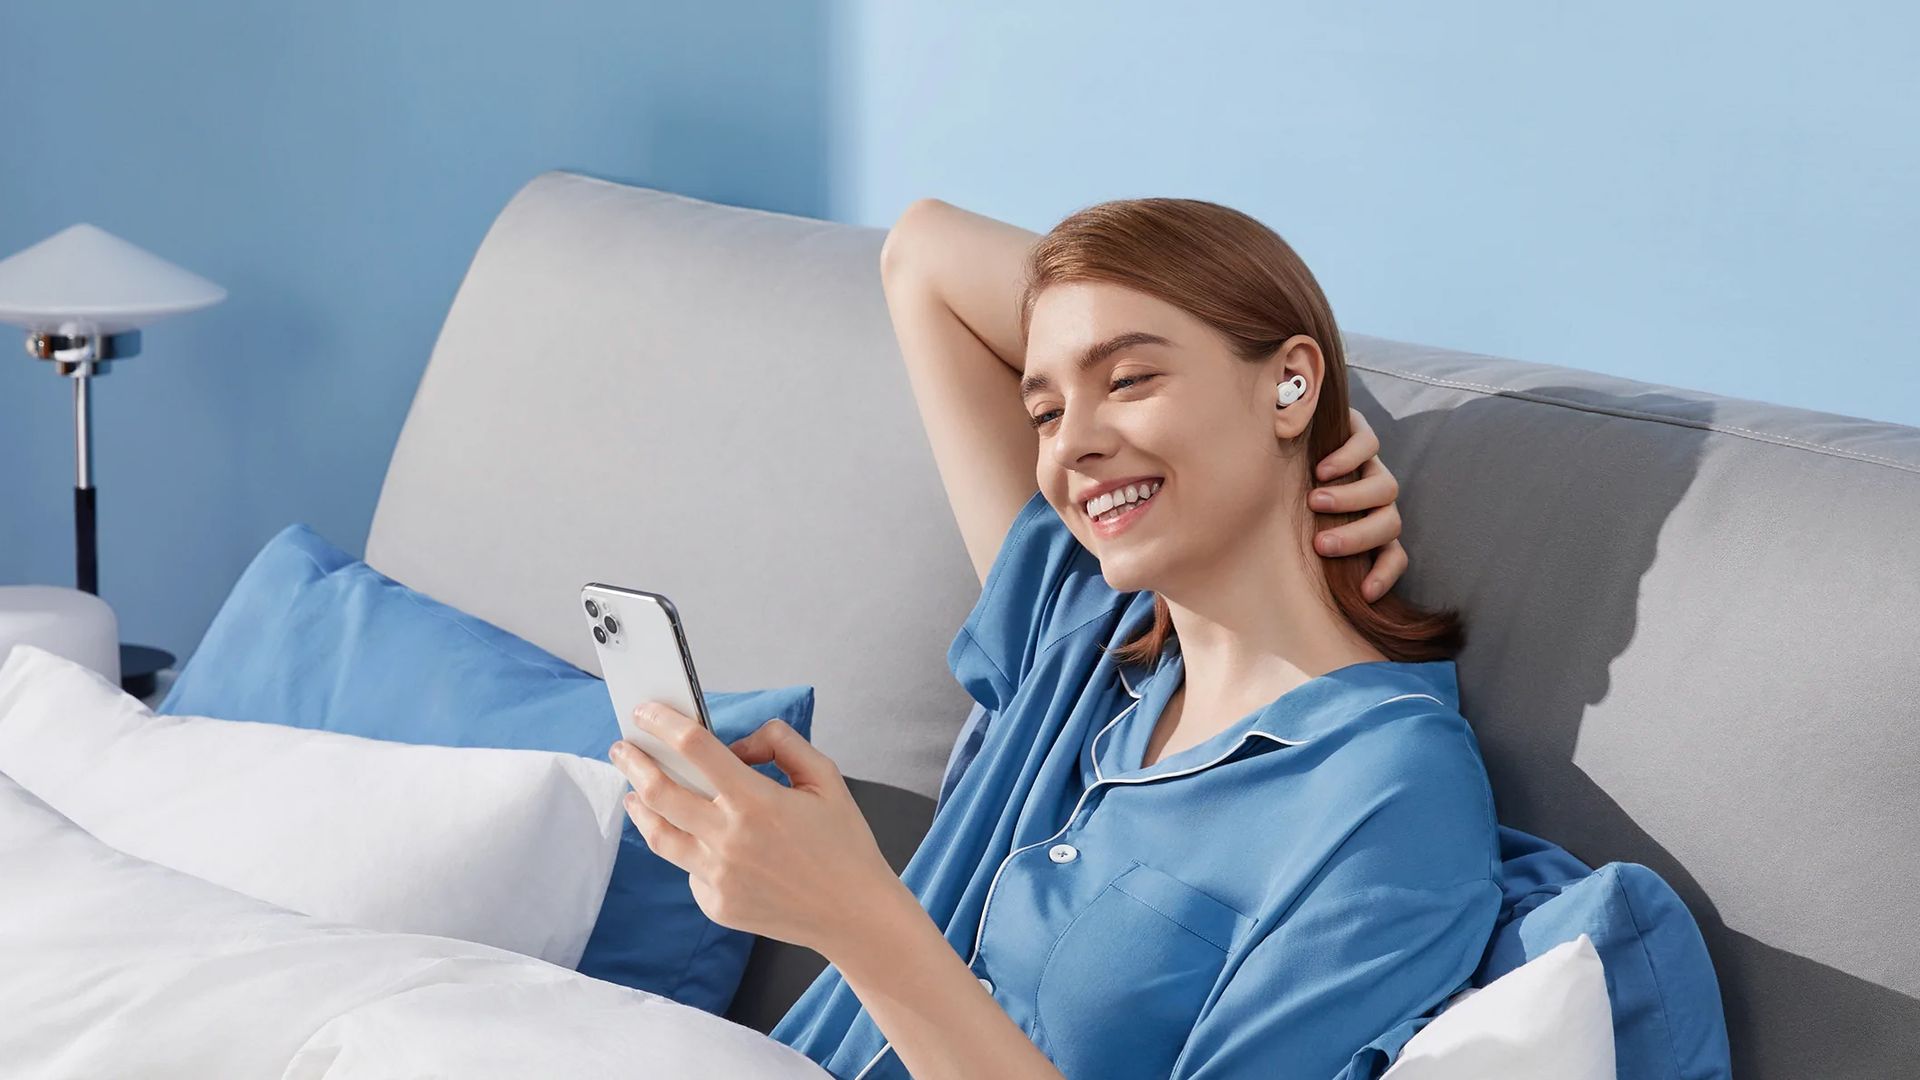 The Anker Sleep A10 Bluetooth Sleep Earbuds are just what you need if you’re a light sleeper